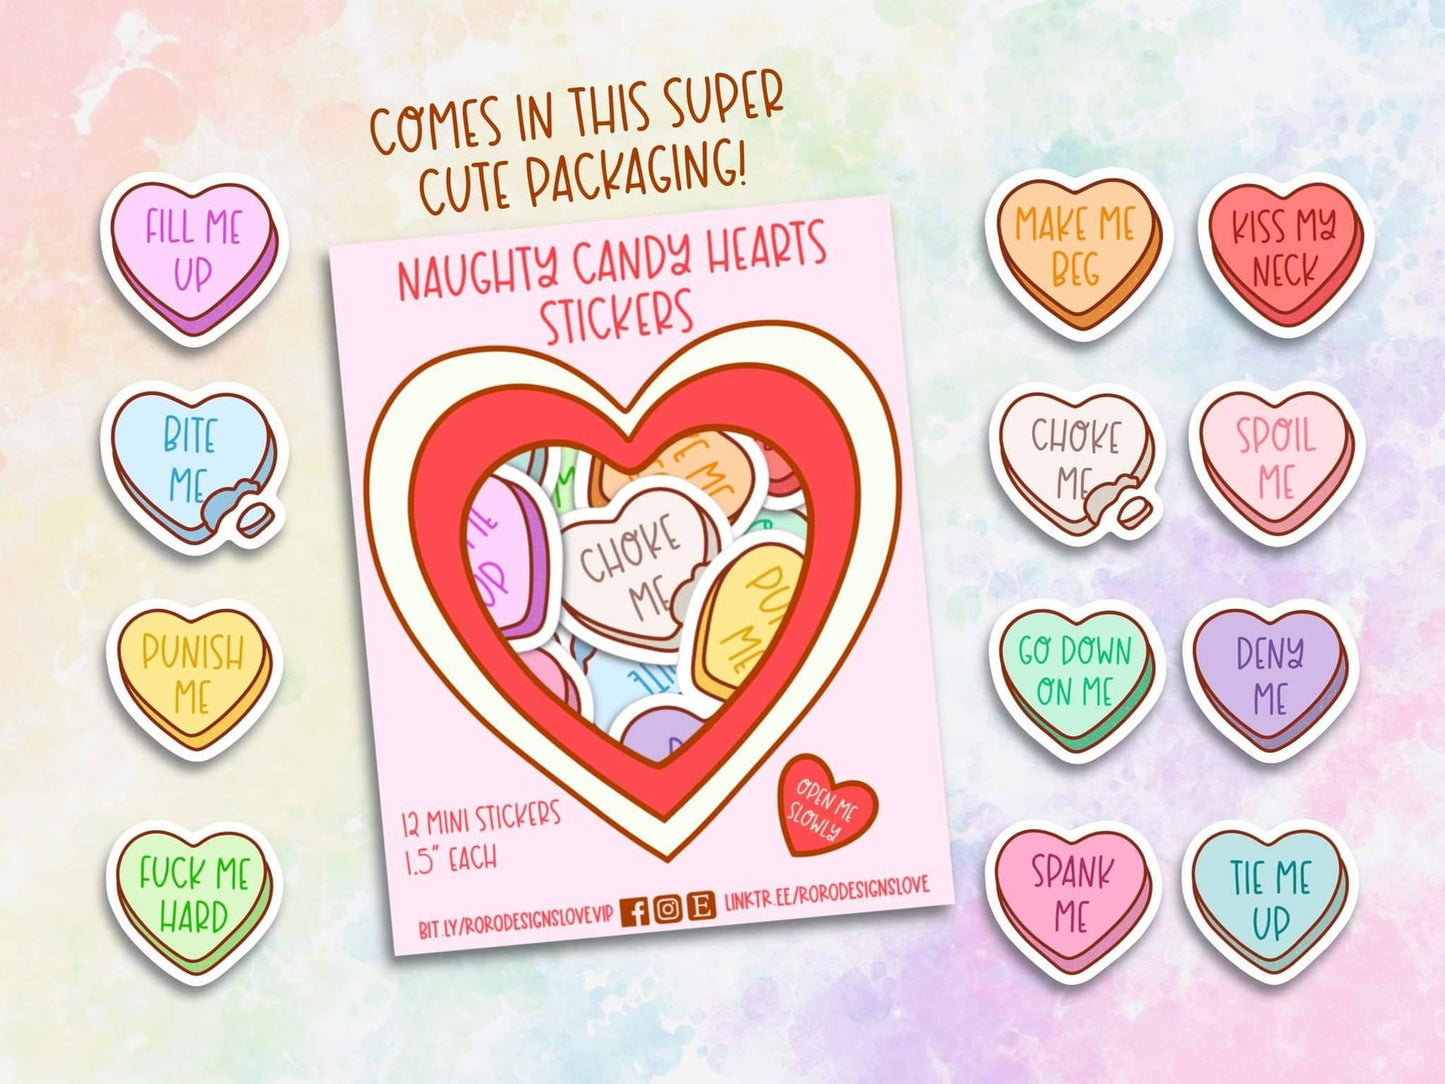 Naughty Candy Hearts 12-Sticker Packs